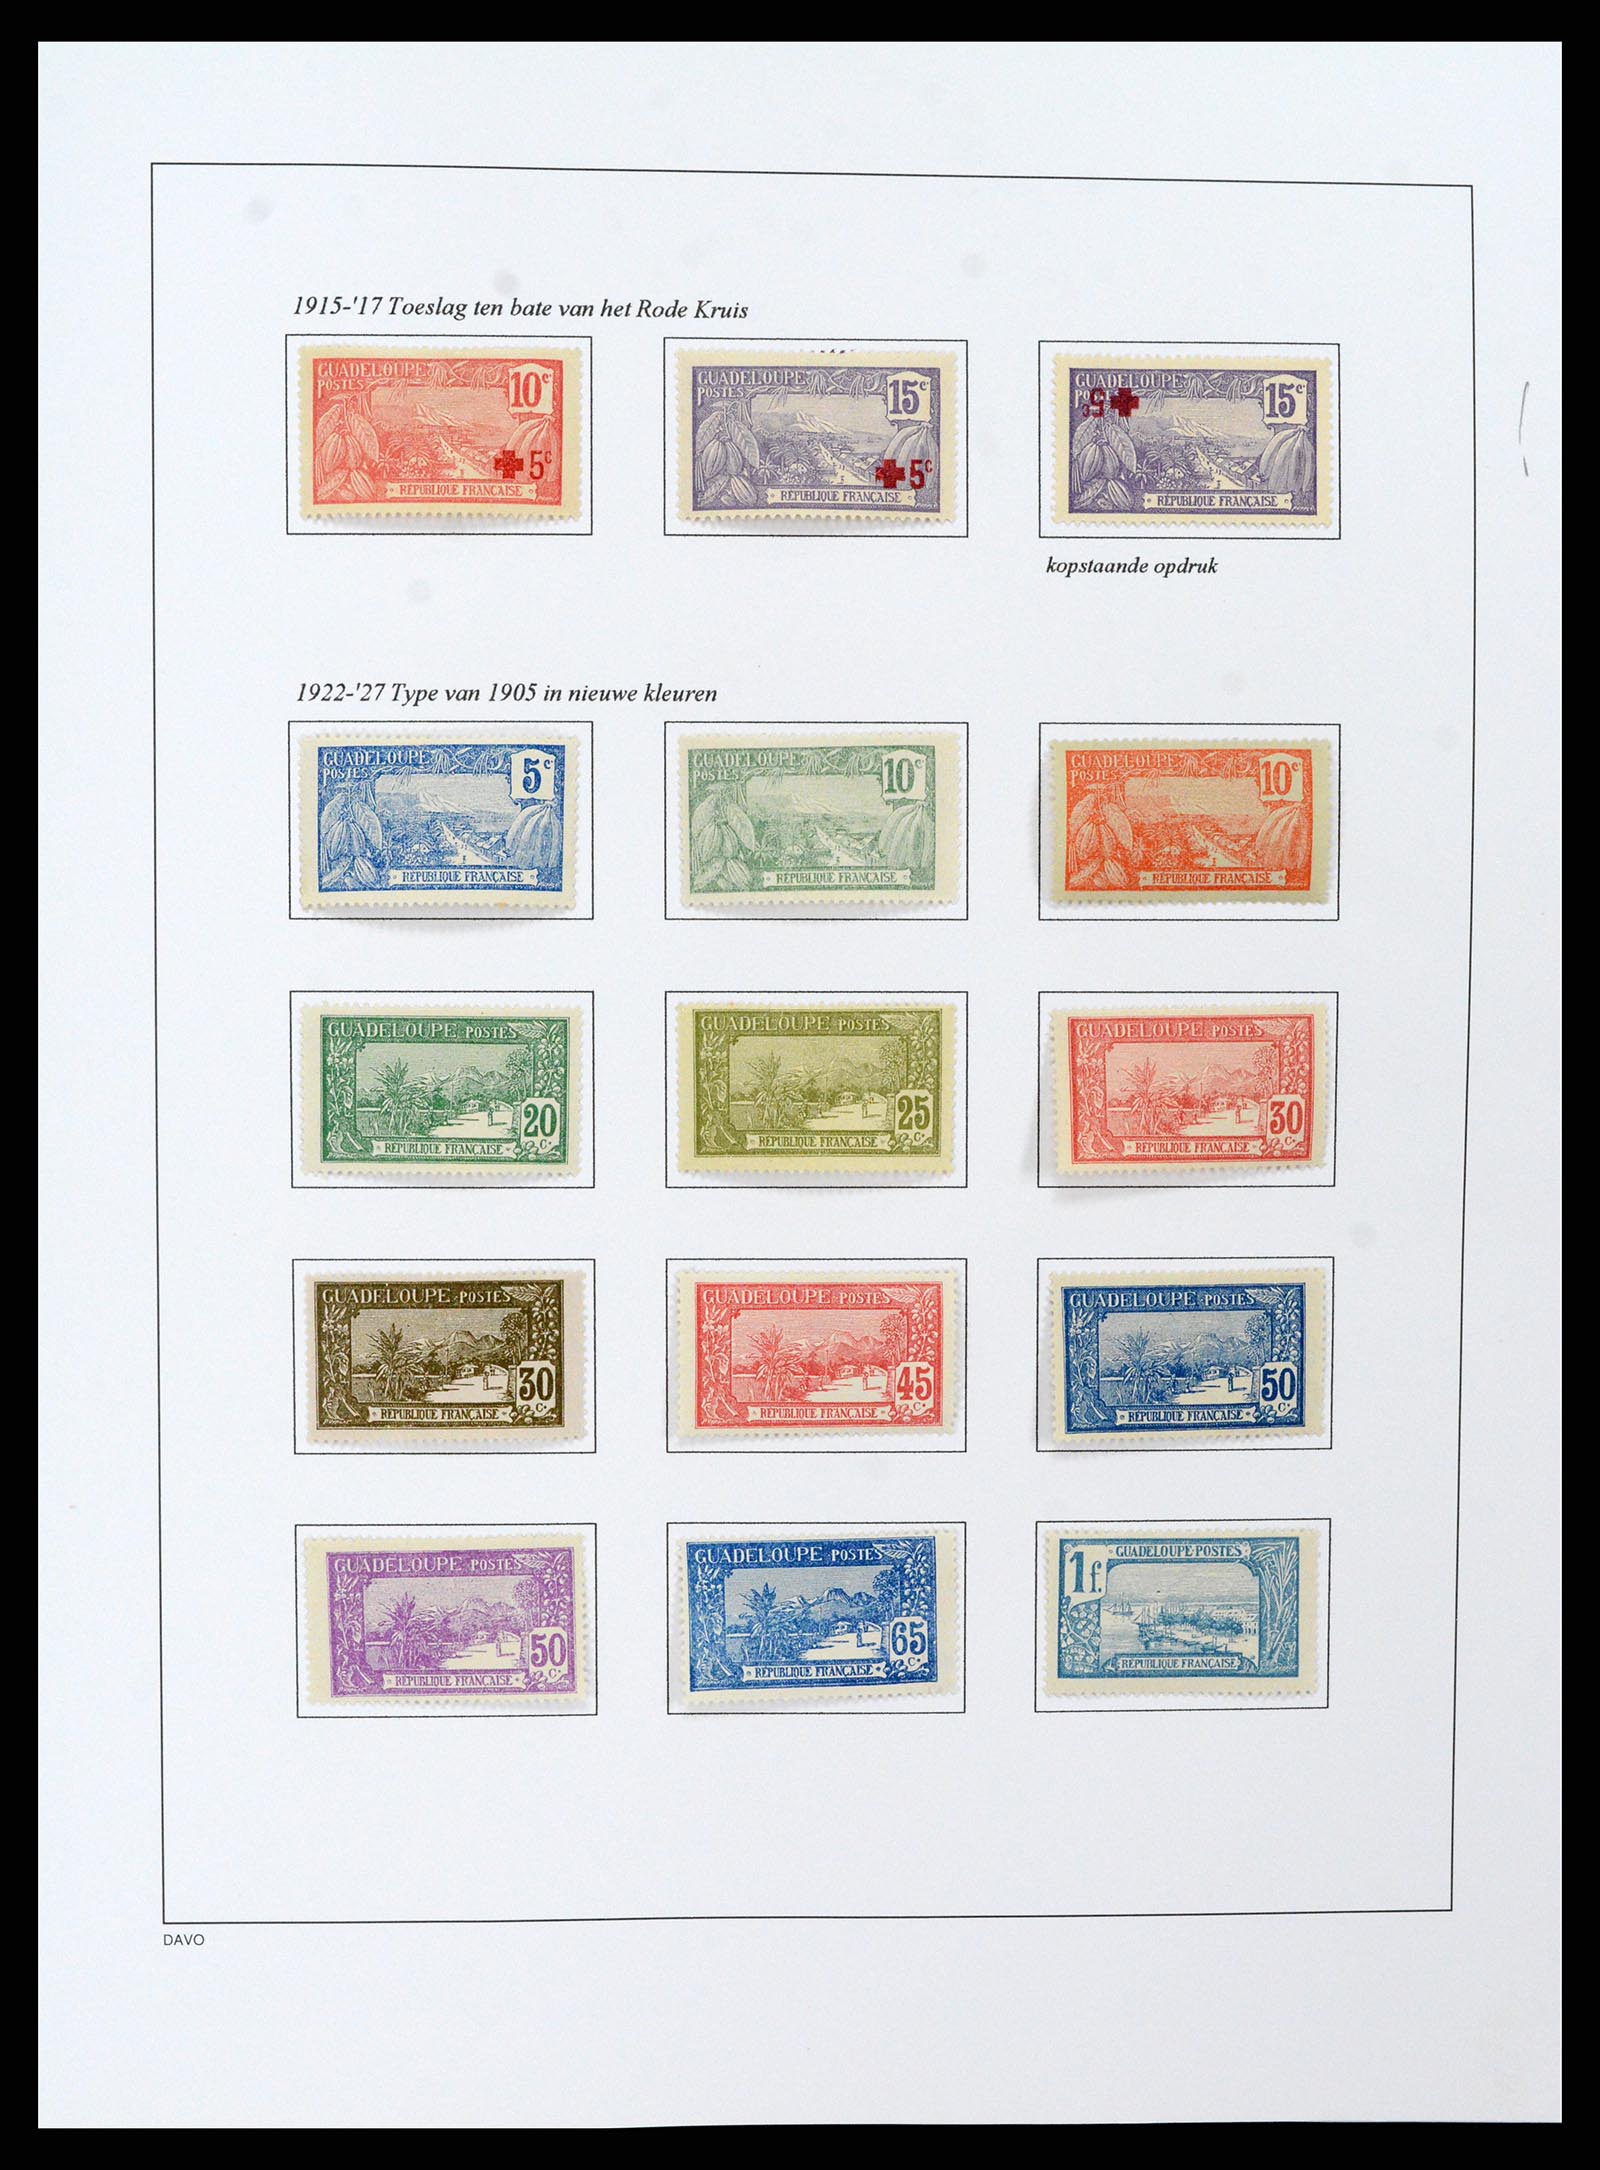 37480 055 - Stamp collection 37480 Guadeloupe supercollection 1823-1947.